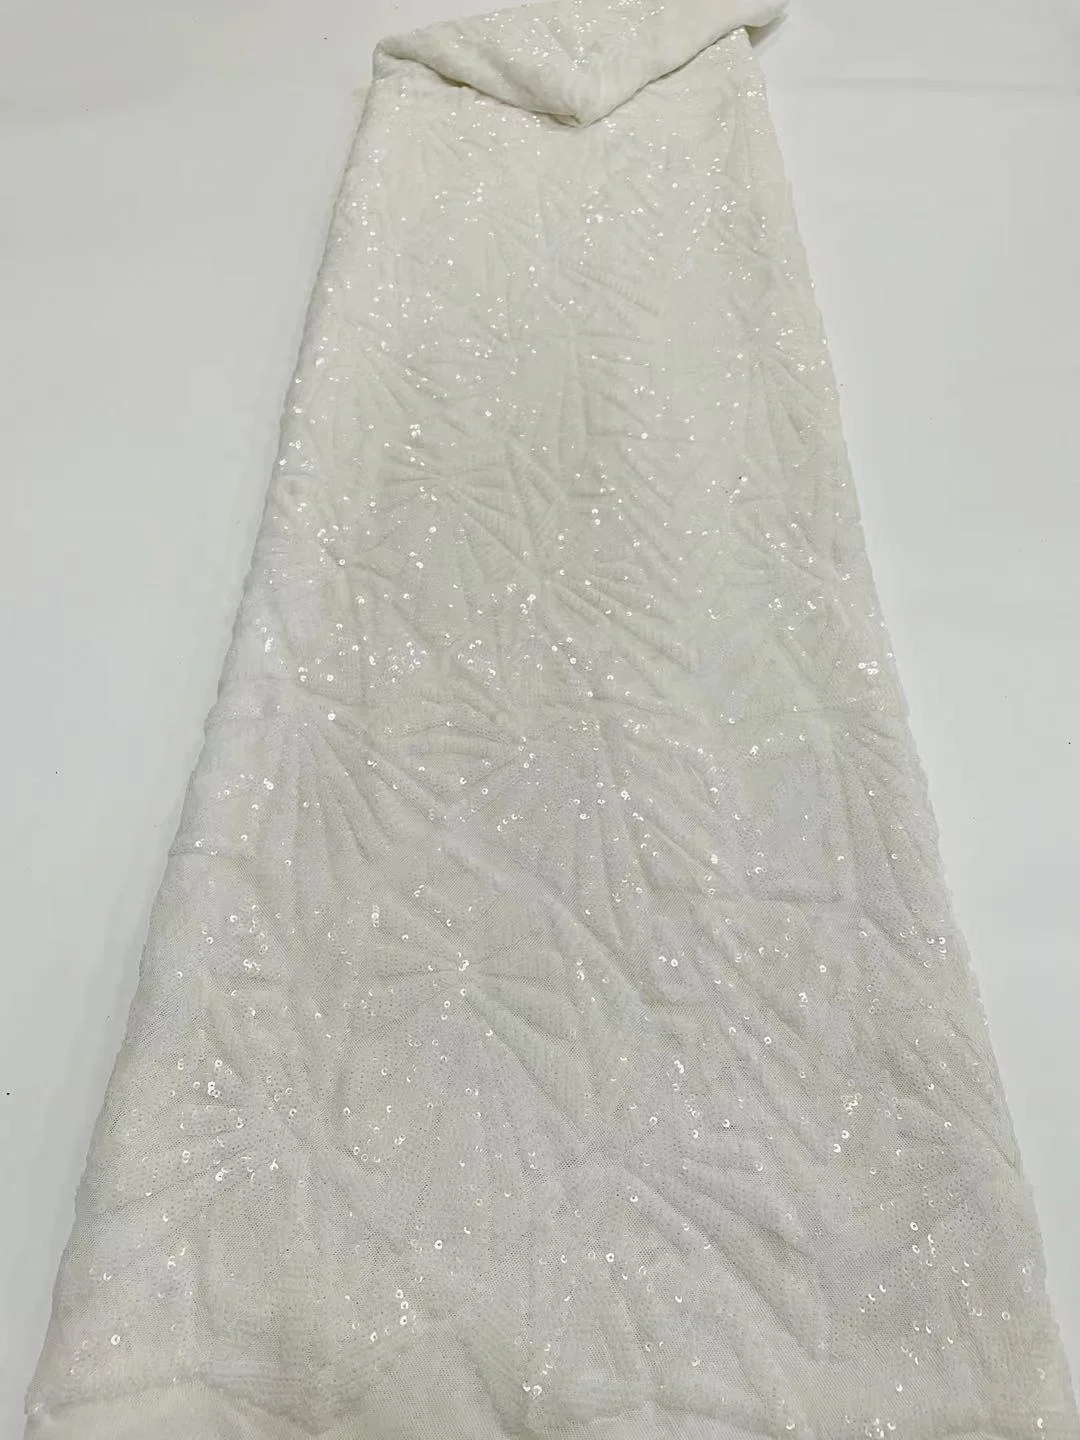 5 Yards Tulle Lace African Lace Fabric With Sequins Fabric High Quality Nigerian French Mesh Net Lace Fabrics For Wedding Party